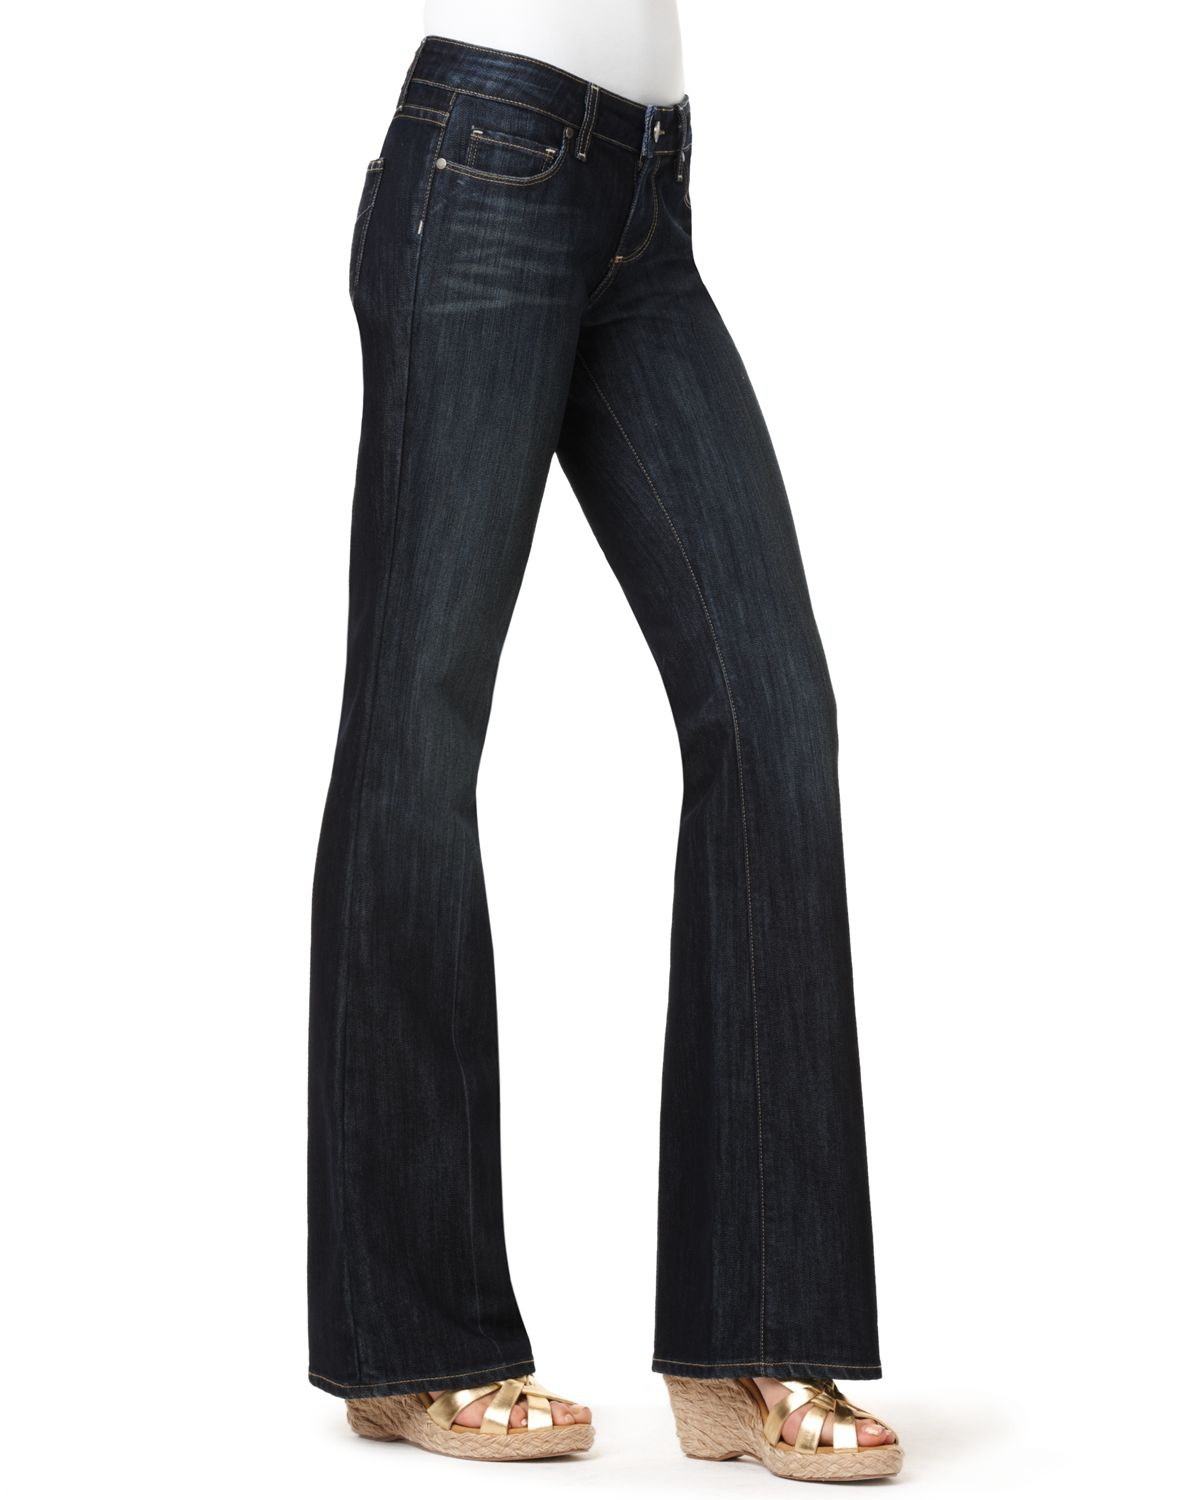 PAIGE Laurel Canyon Bootcut Jeans in Mckinley Wash in Blue | Lyst